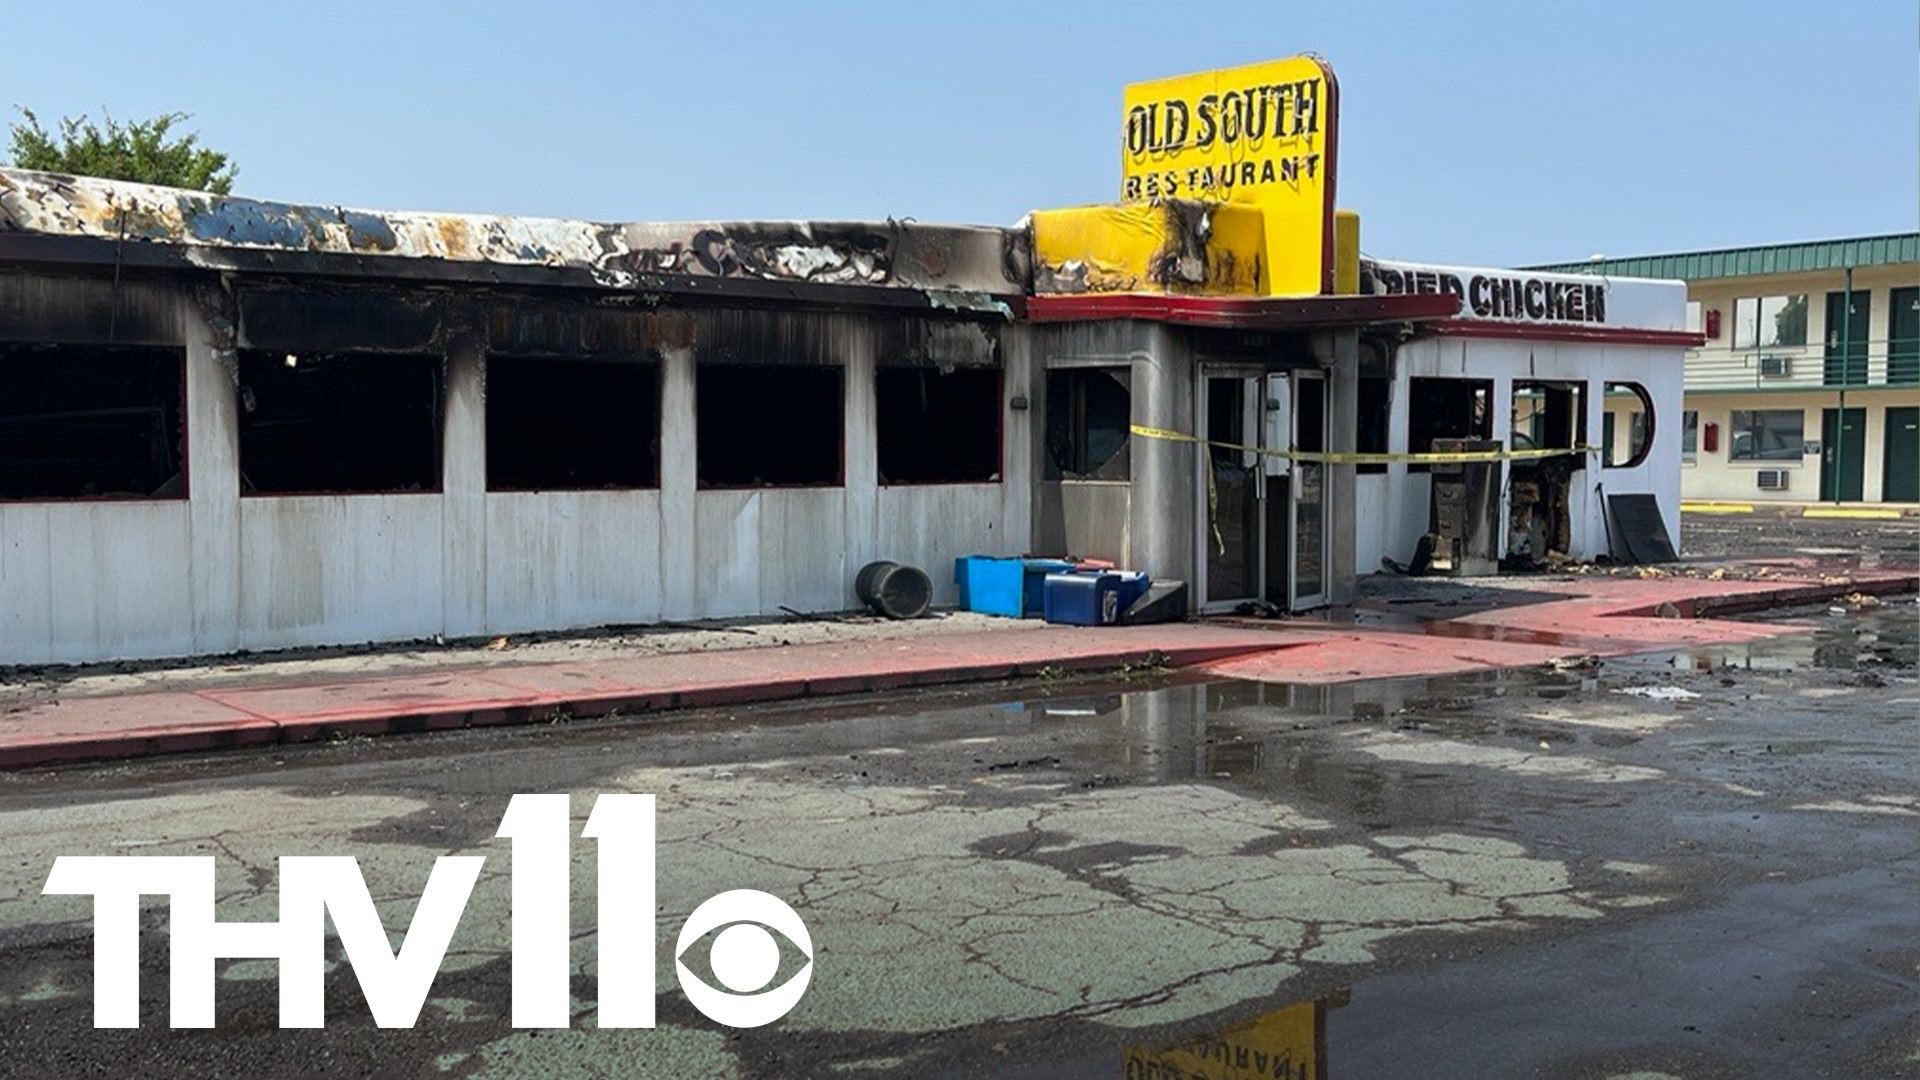 Russellville fire crews responded to reports of a fire at the historic Old South restaurant in the early morning hours of June 6.